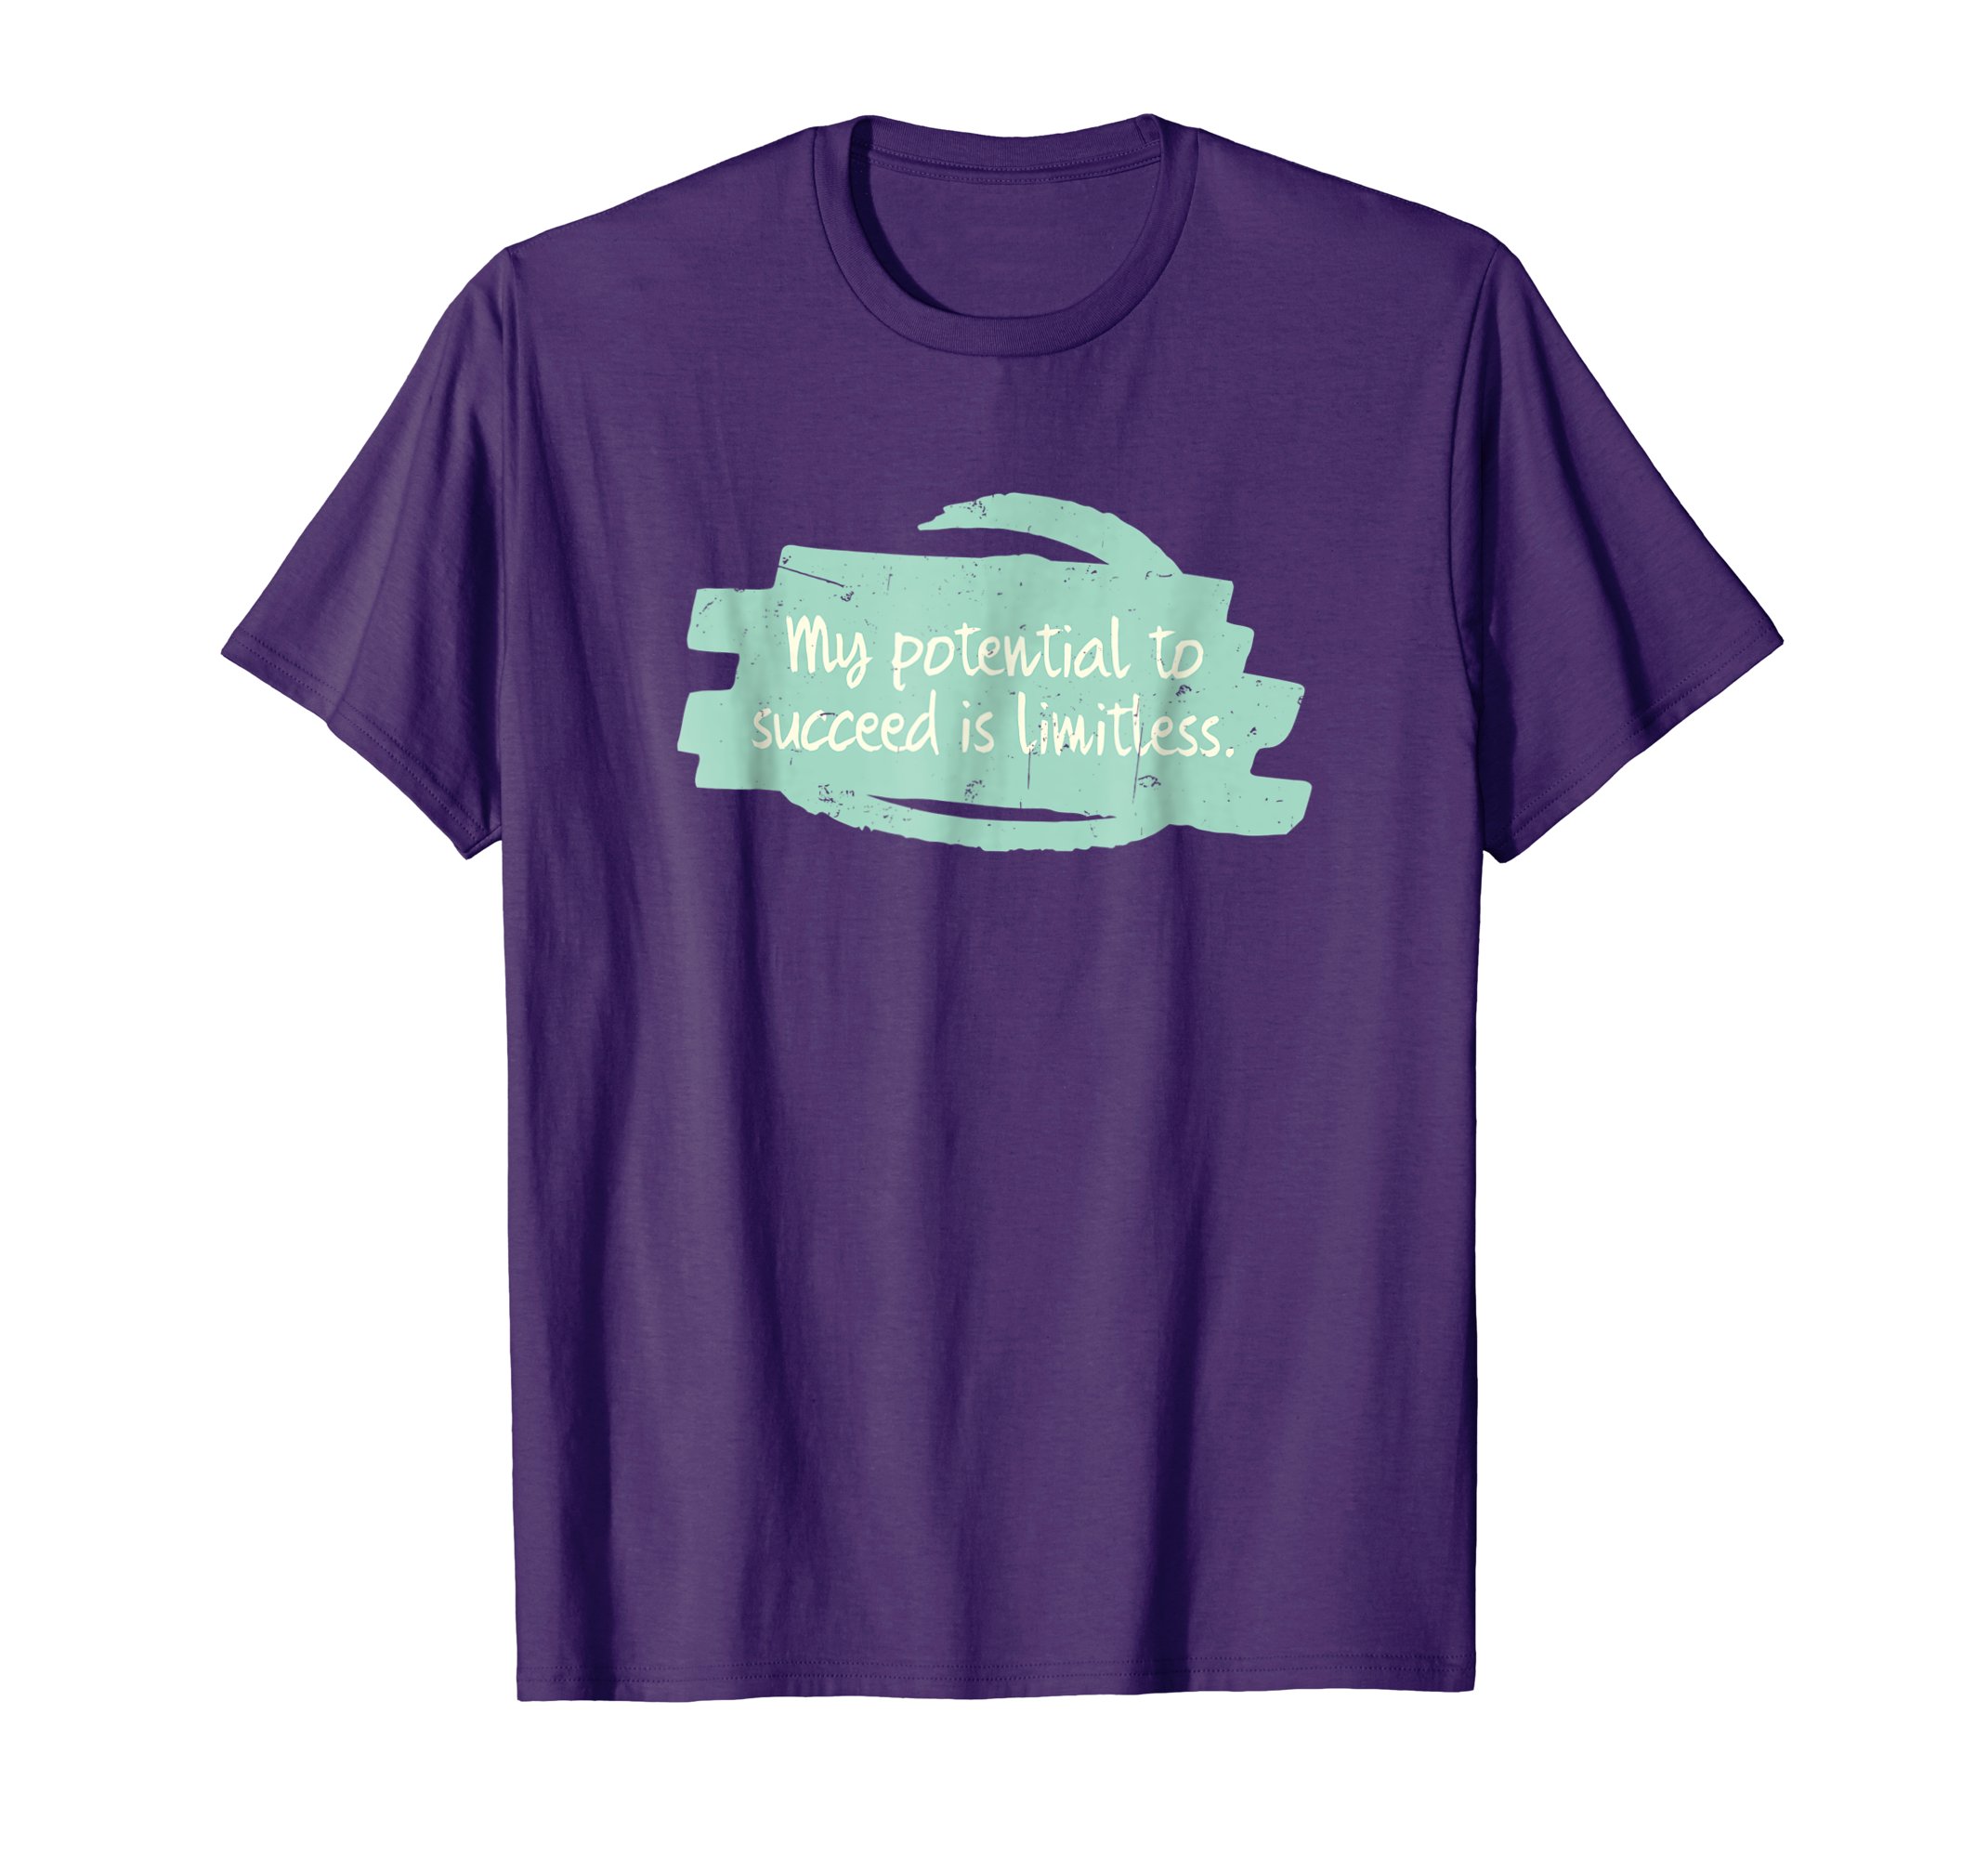 Brandon Charnell Positive Quote Uplifting T-Shirt Limitless Success Happiness